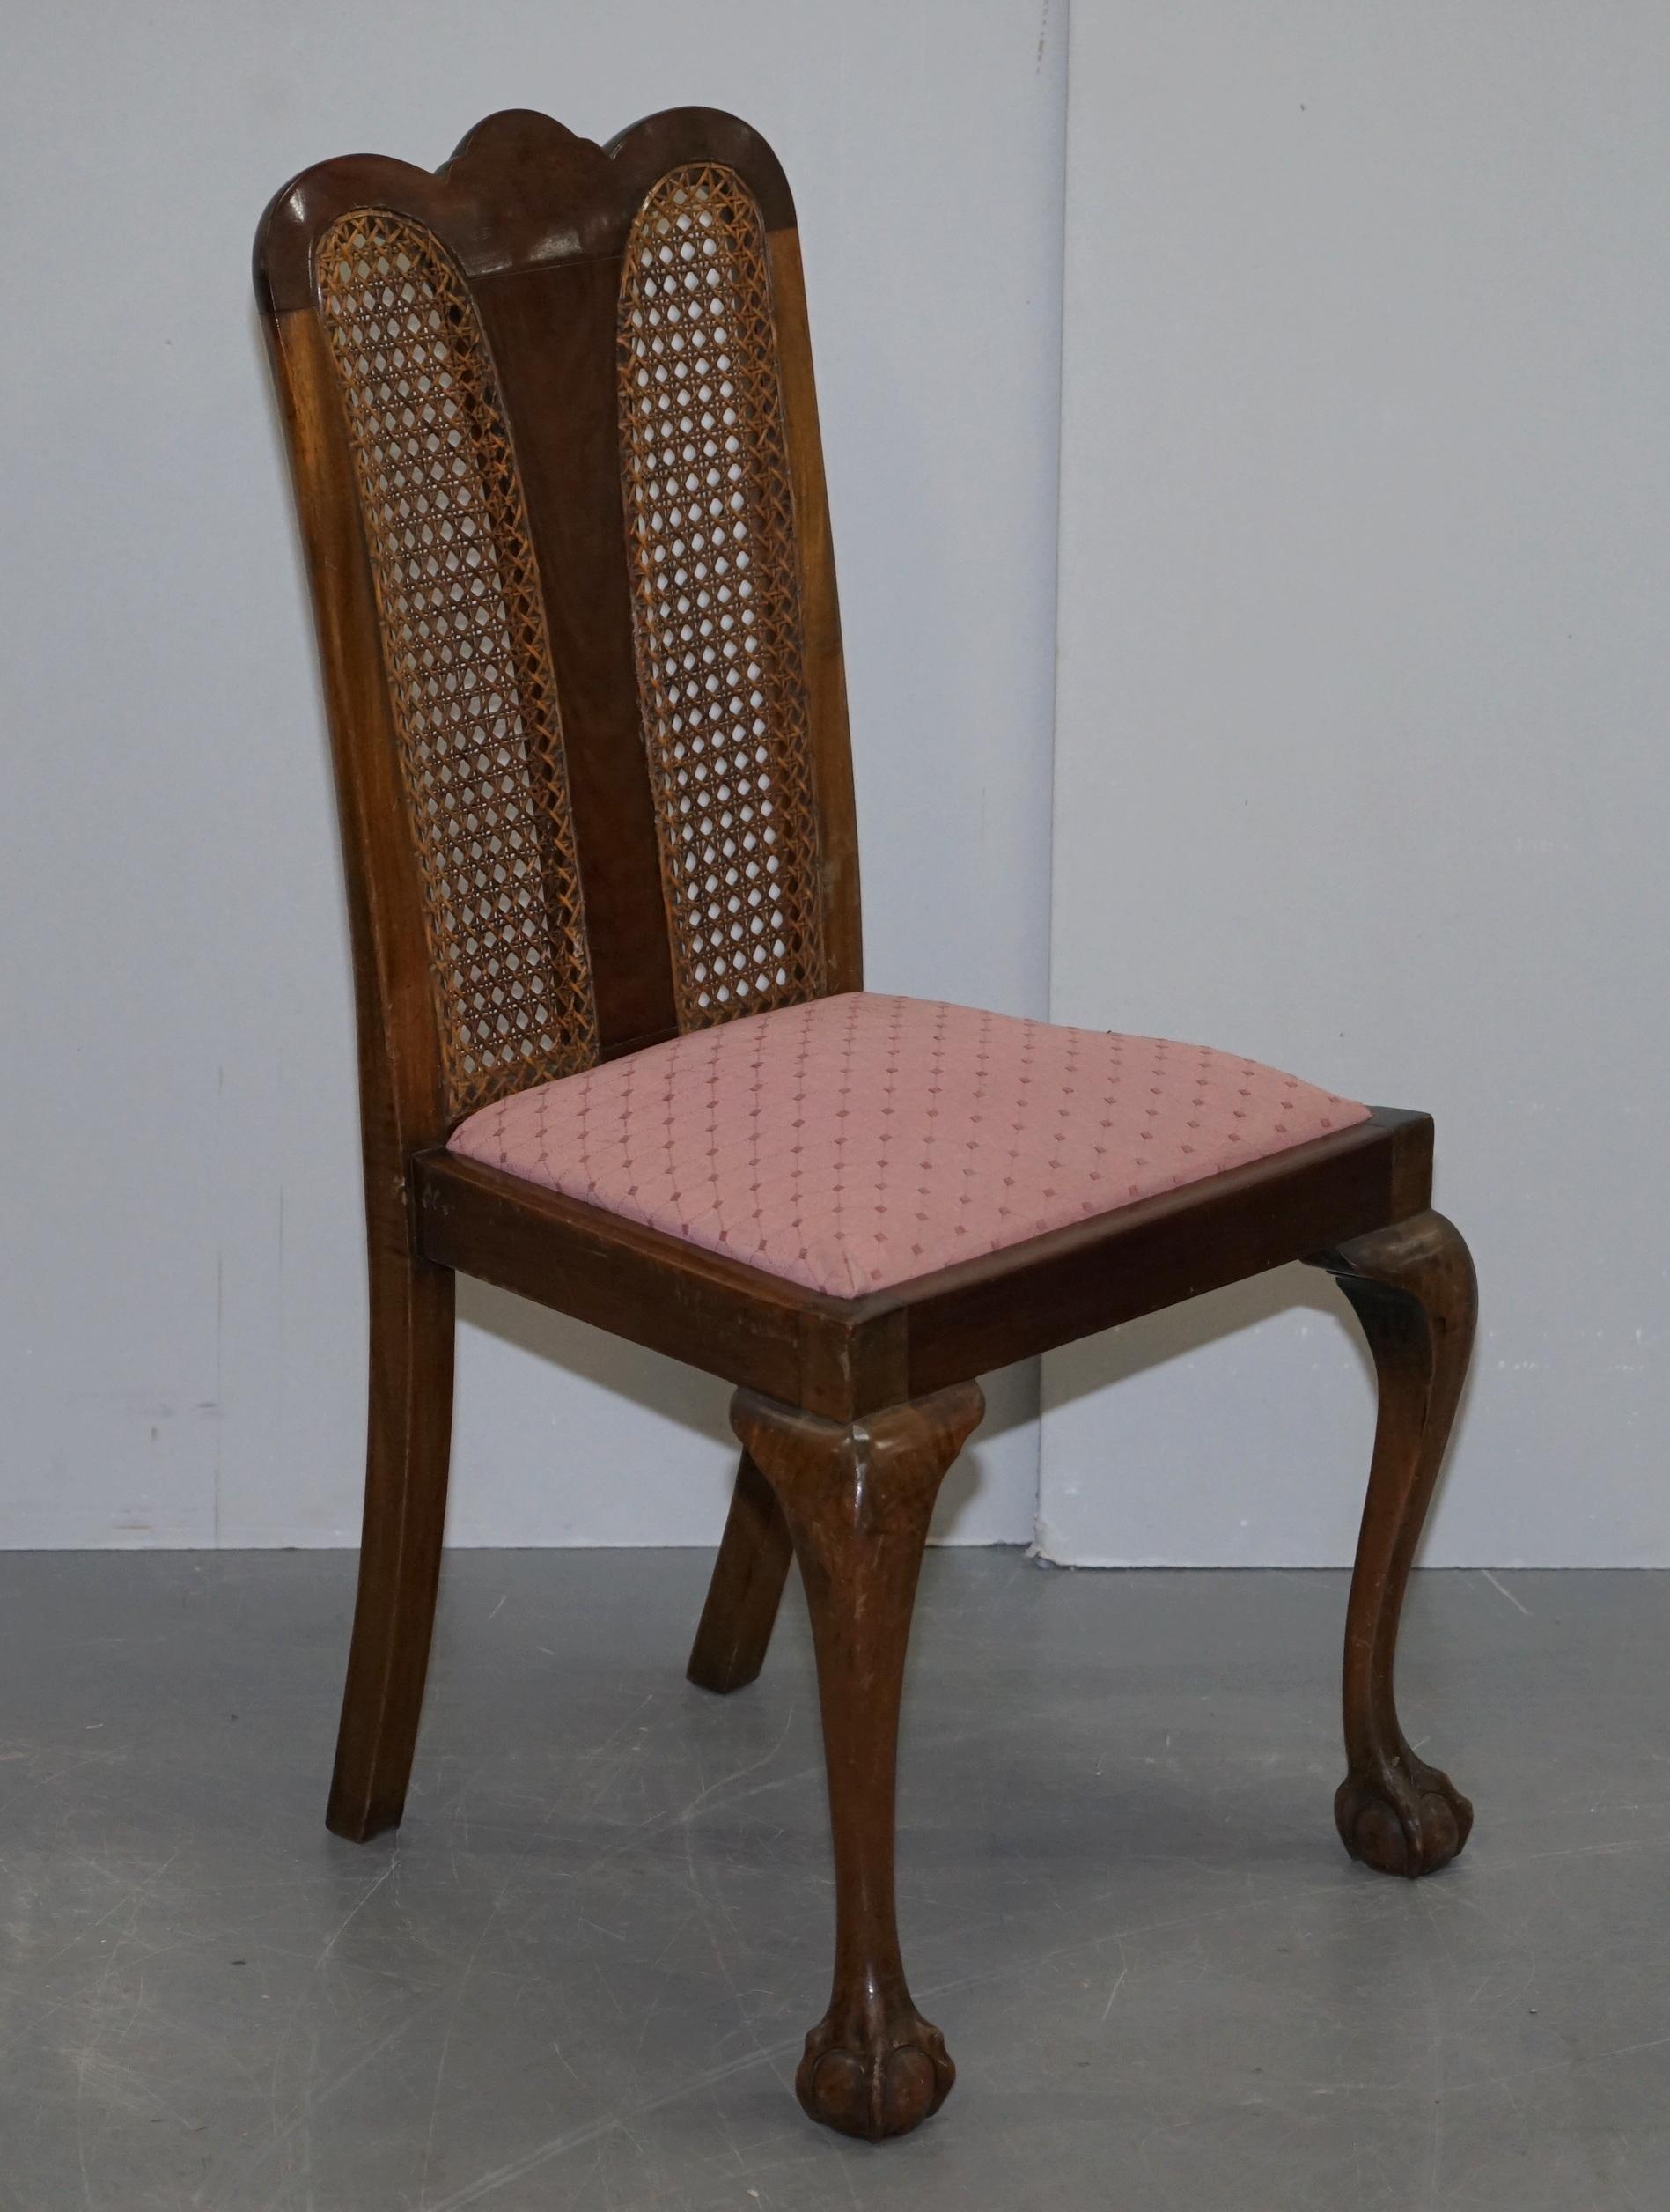 We are delighted to offer for sale this lovely pair of circa 1940s Claw & Ball feet mahogany and bergere occasional chairs

A very good looking, well made and decorative pair of occasional chairs. Ideally suited for a hallway to sit either side of a